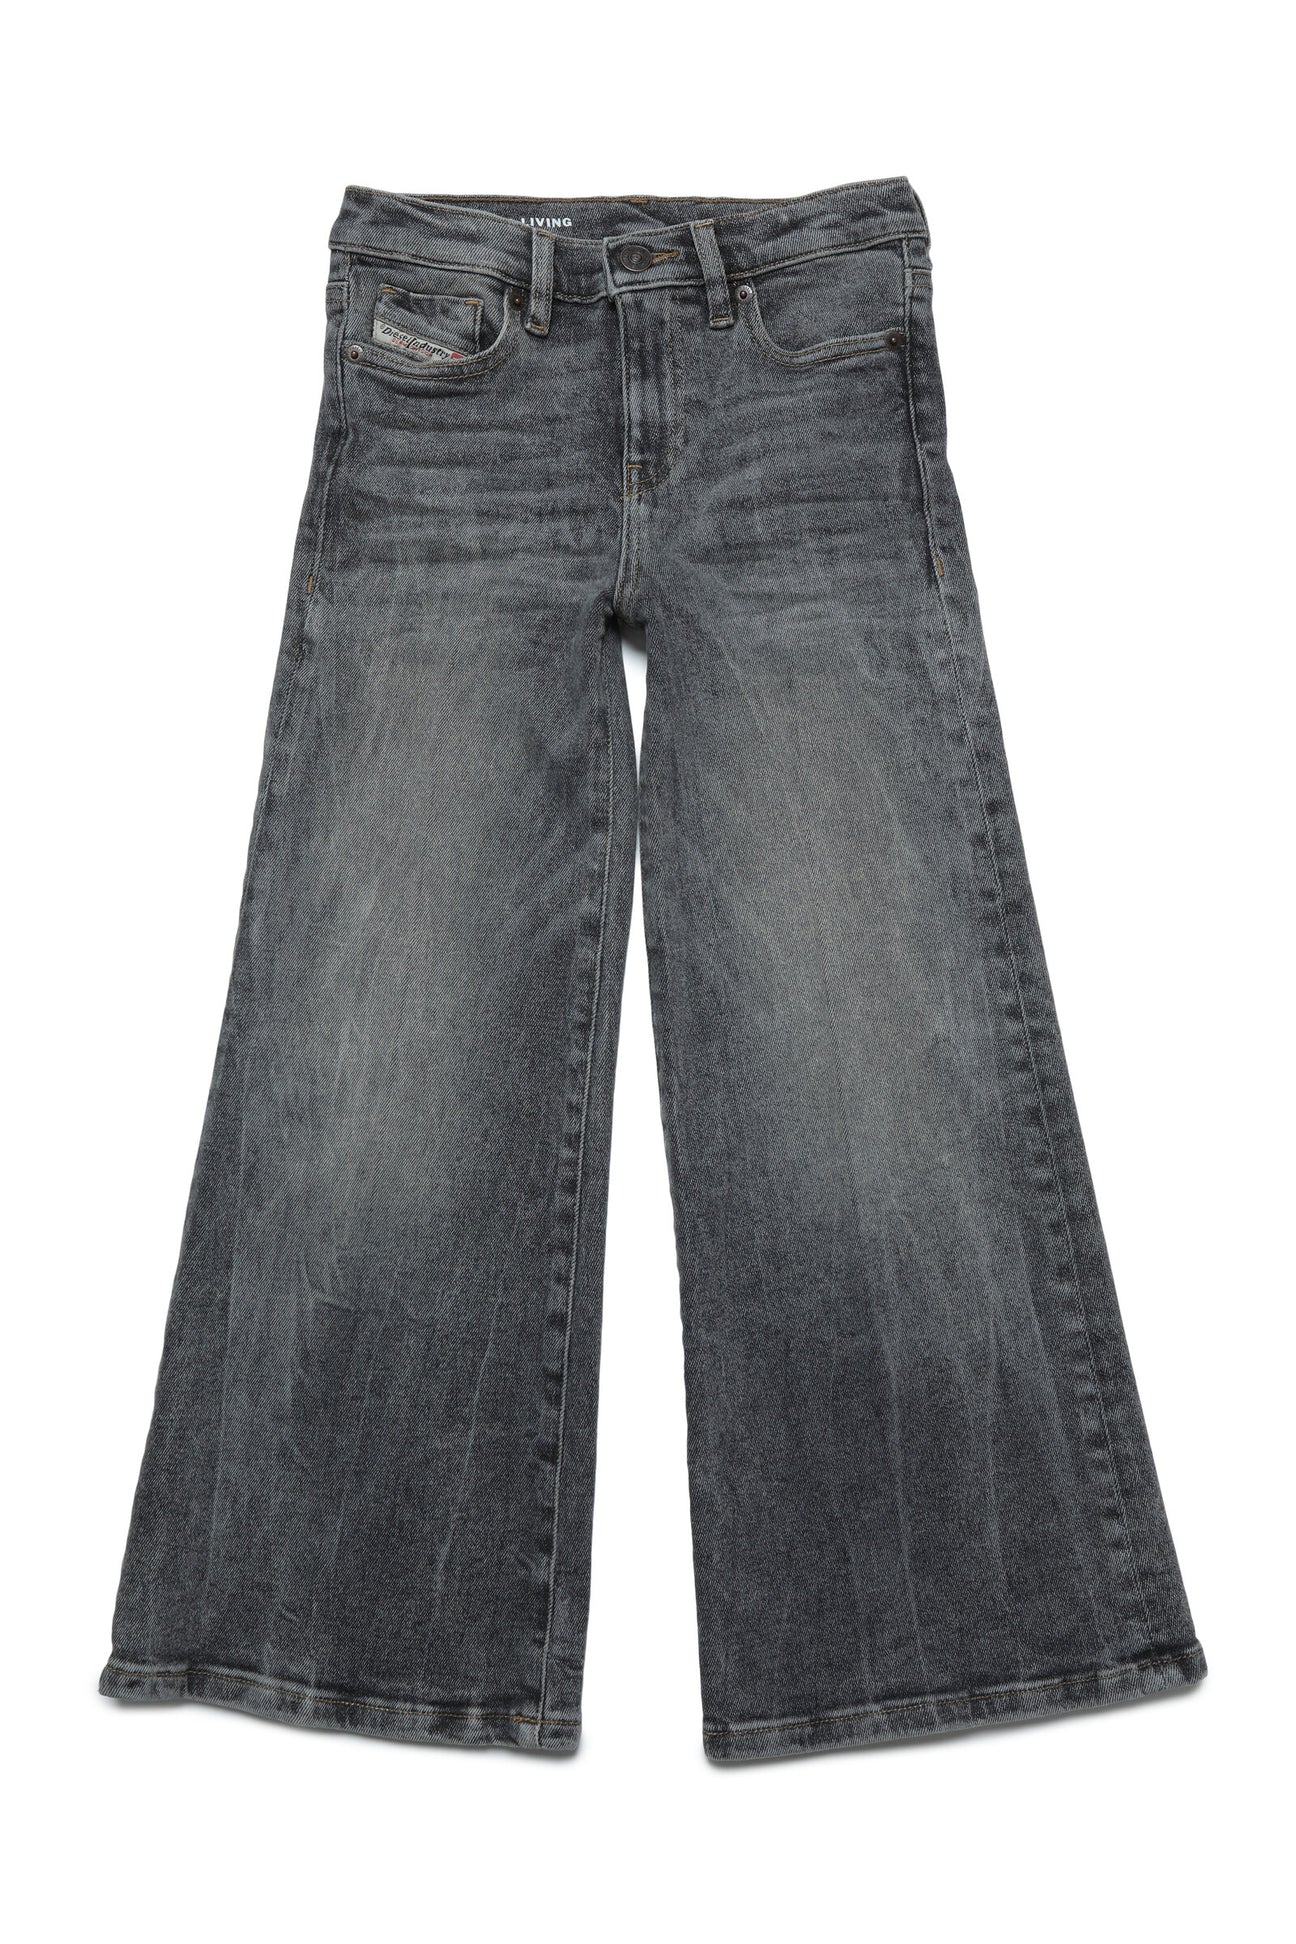 Jeans 1978 flare gray marbled effect 